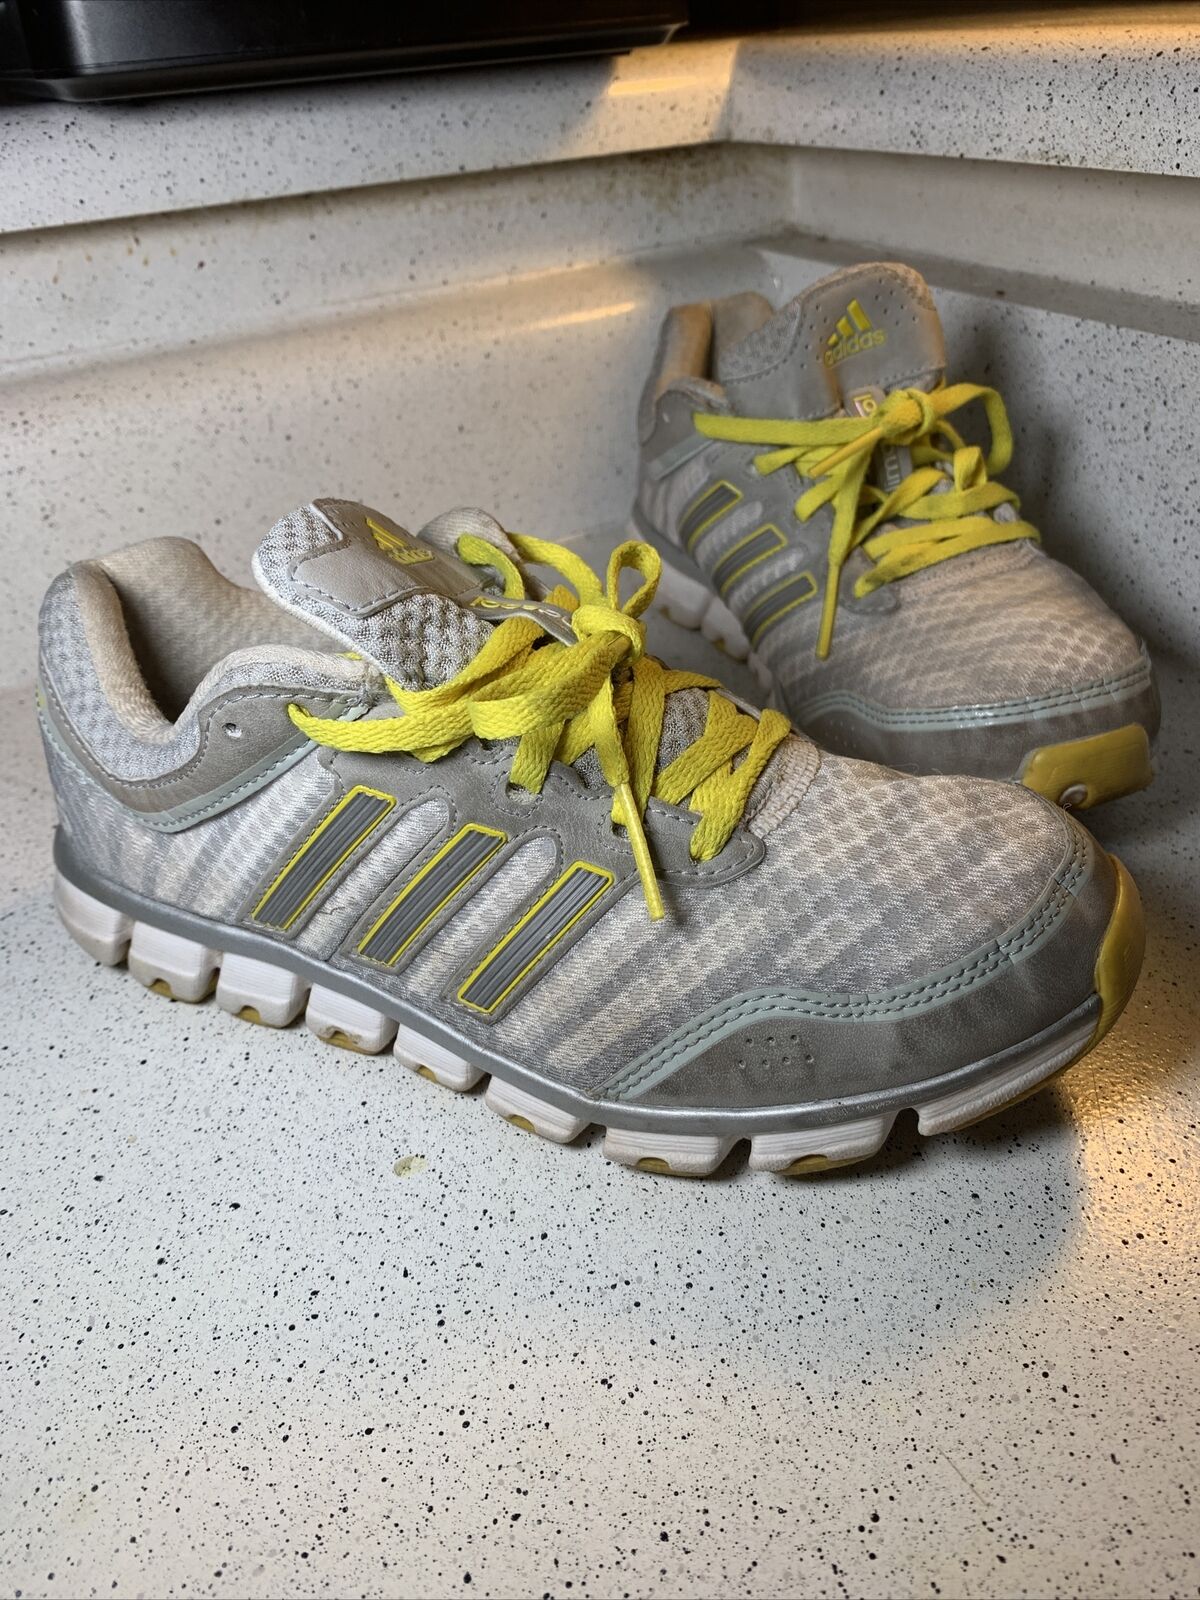 Adidas Climacool Tennis Shoes Woman Size 6 color gray and yellow Pre Owned